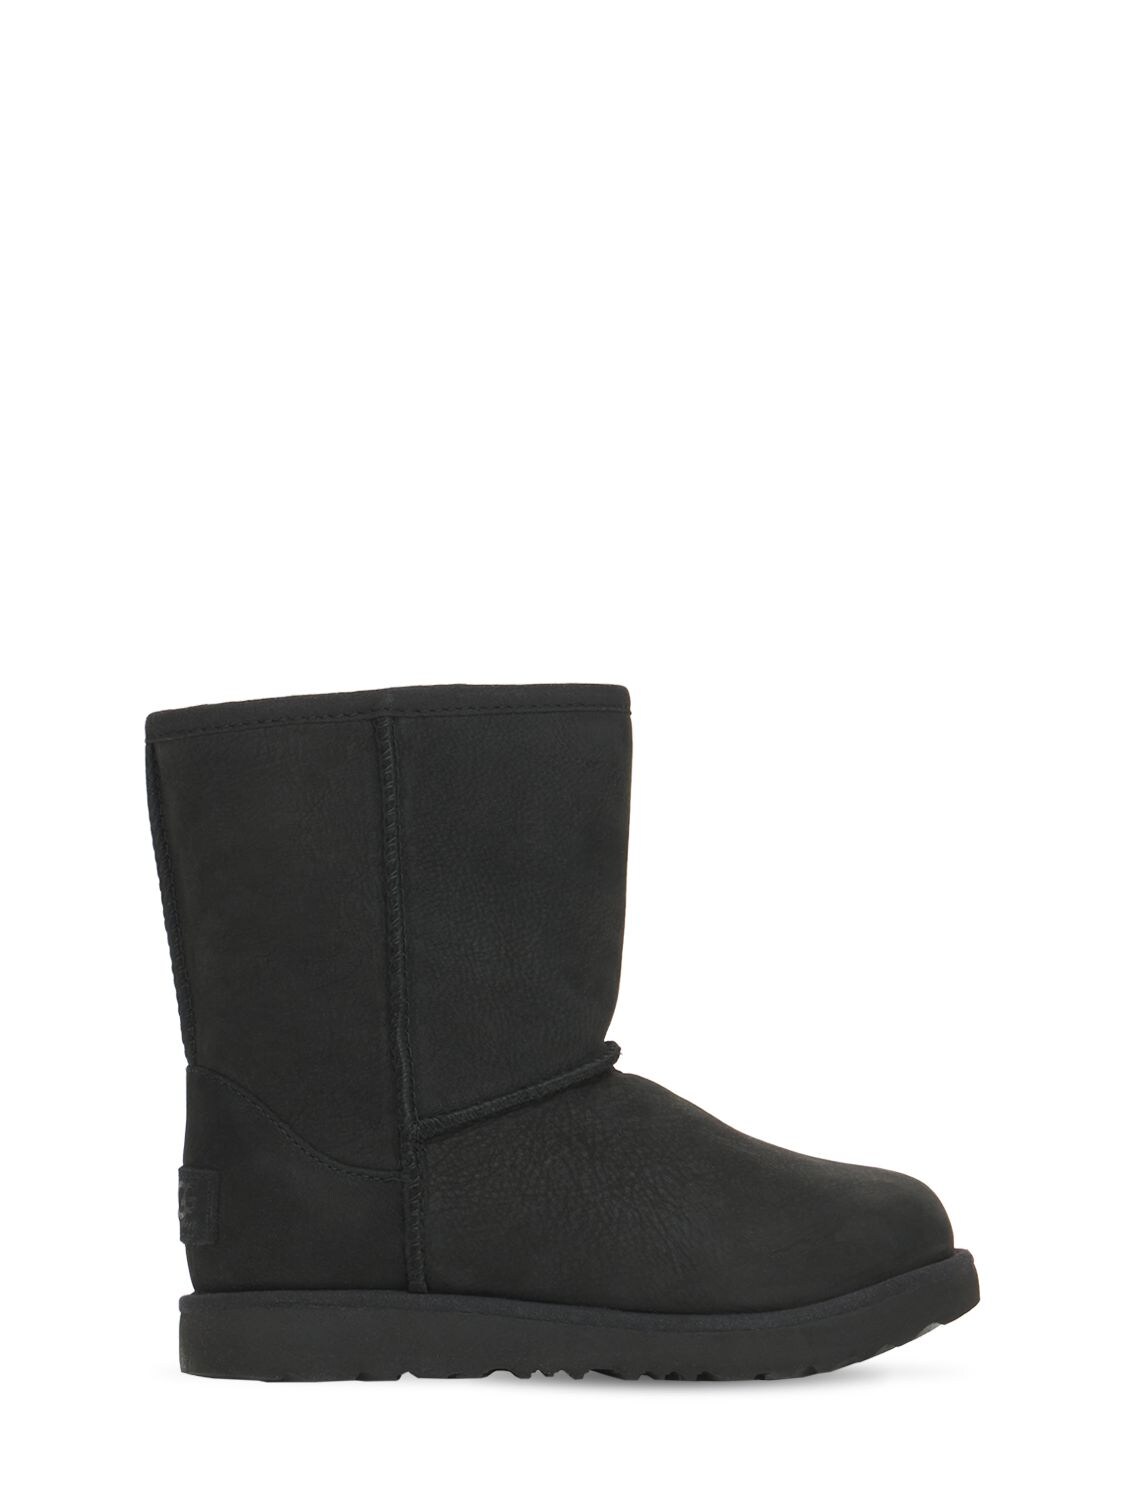 Classic Shearling Boots